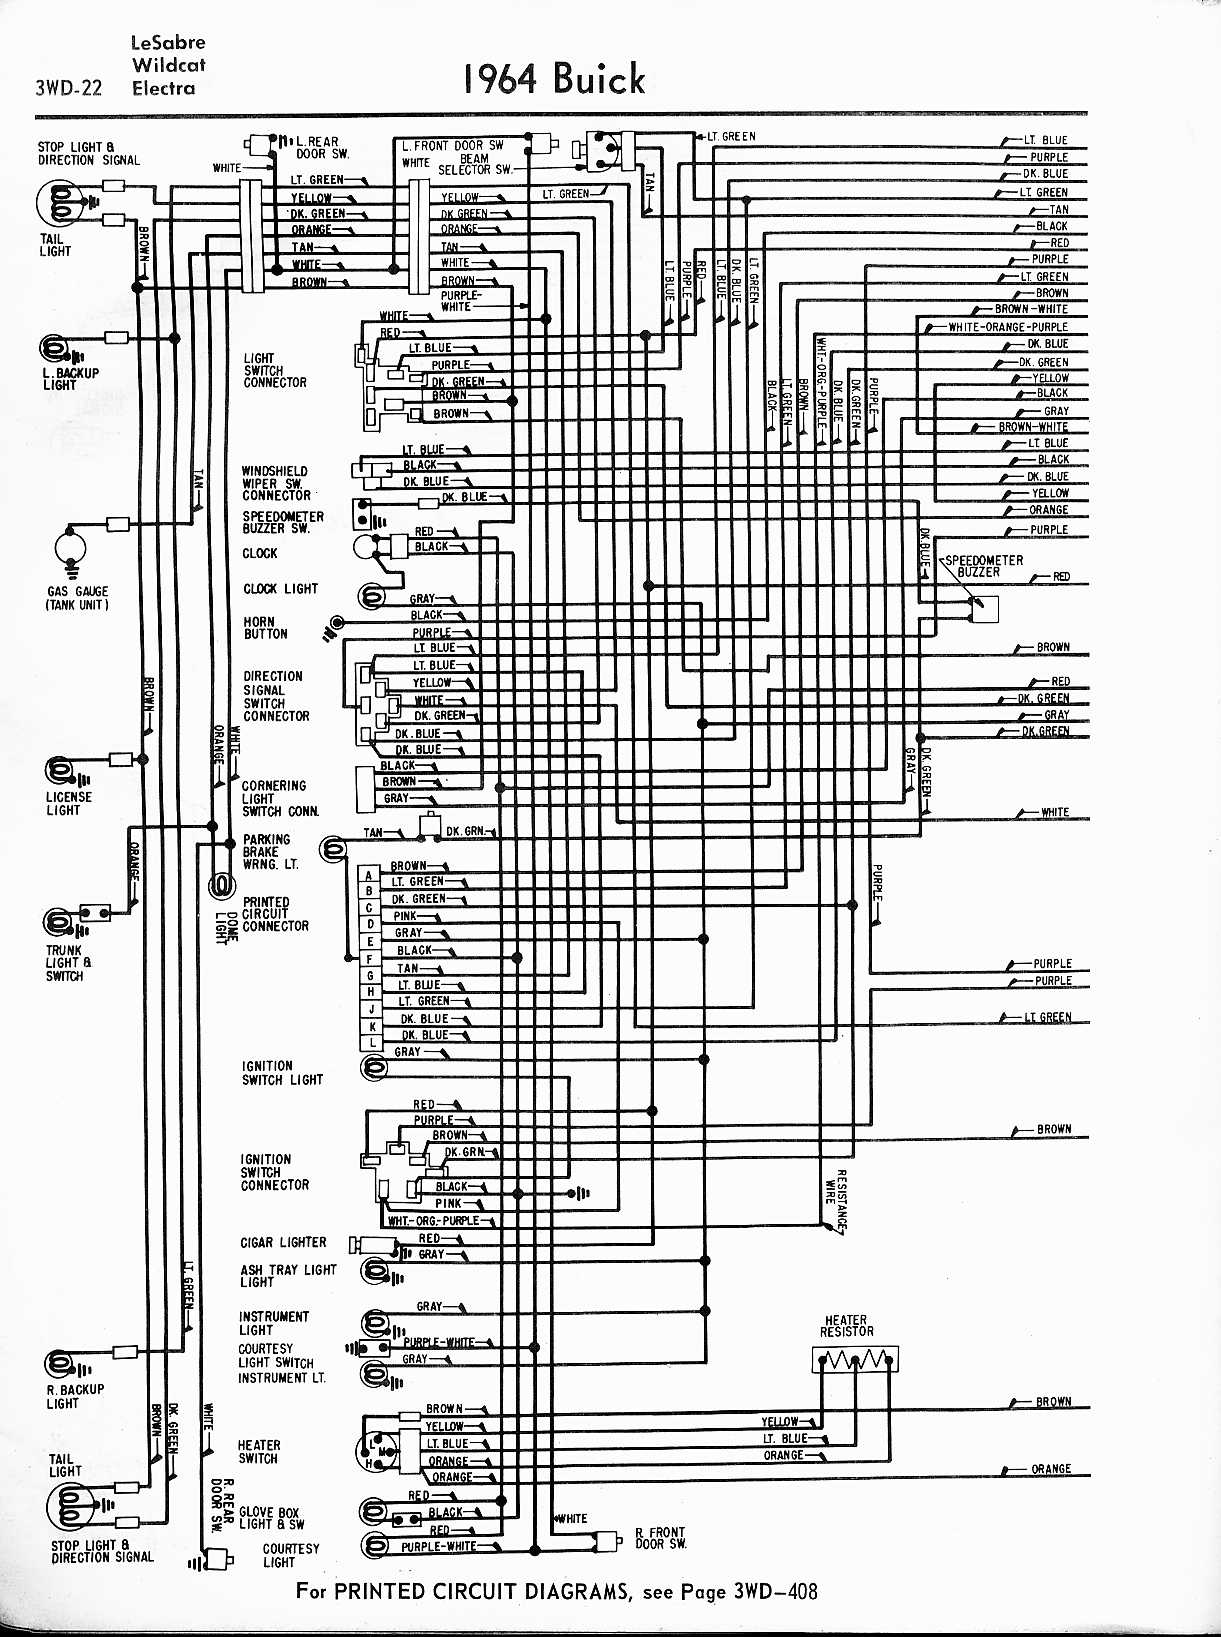 2003 Buick Rendezvous Wiring Diagram from www.oldcarmanualproject.com